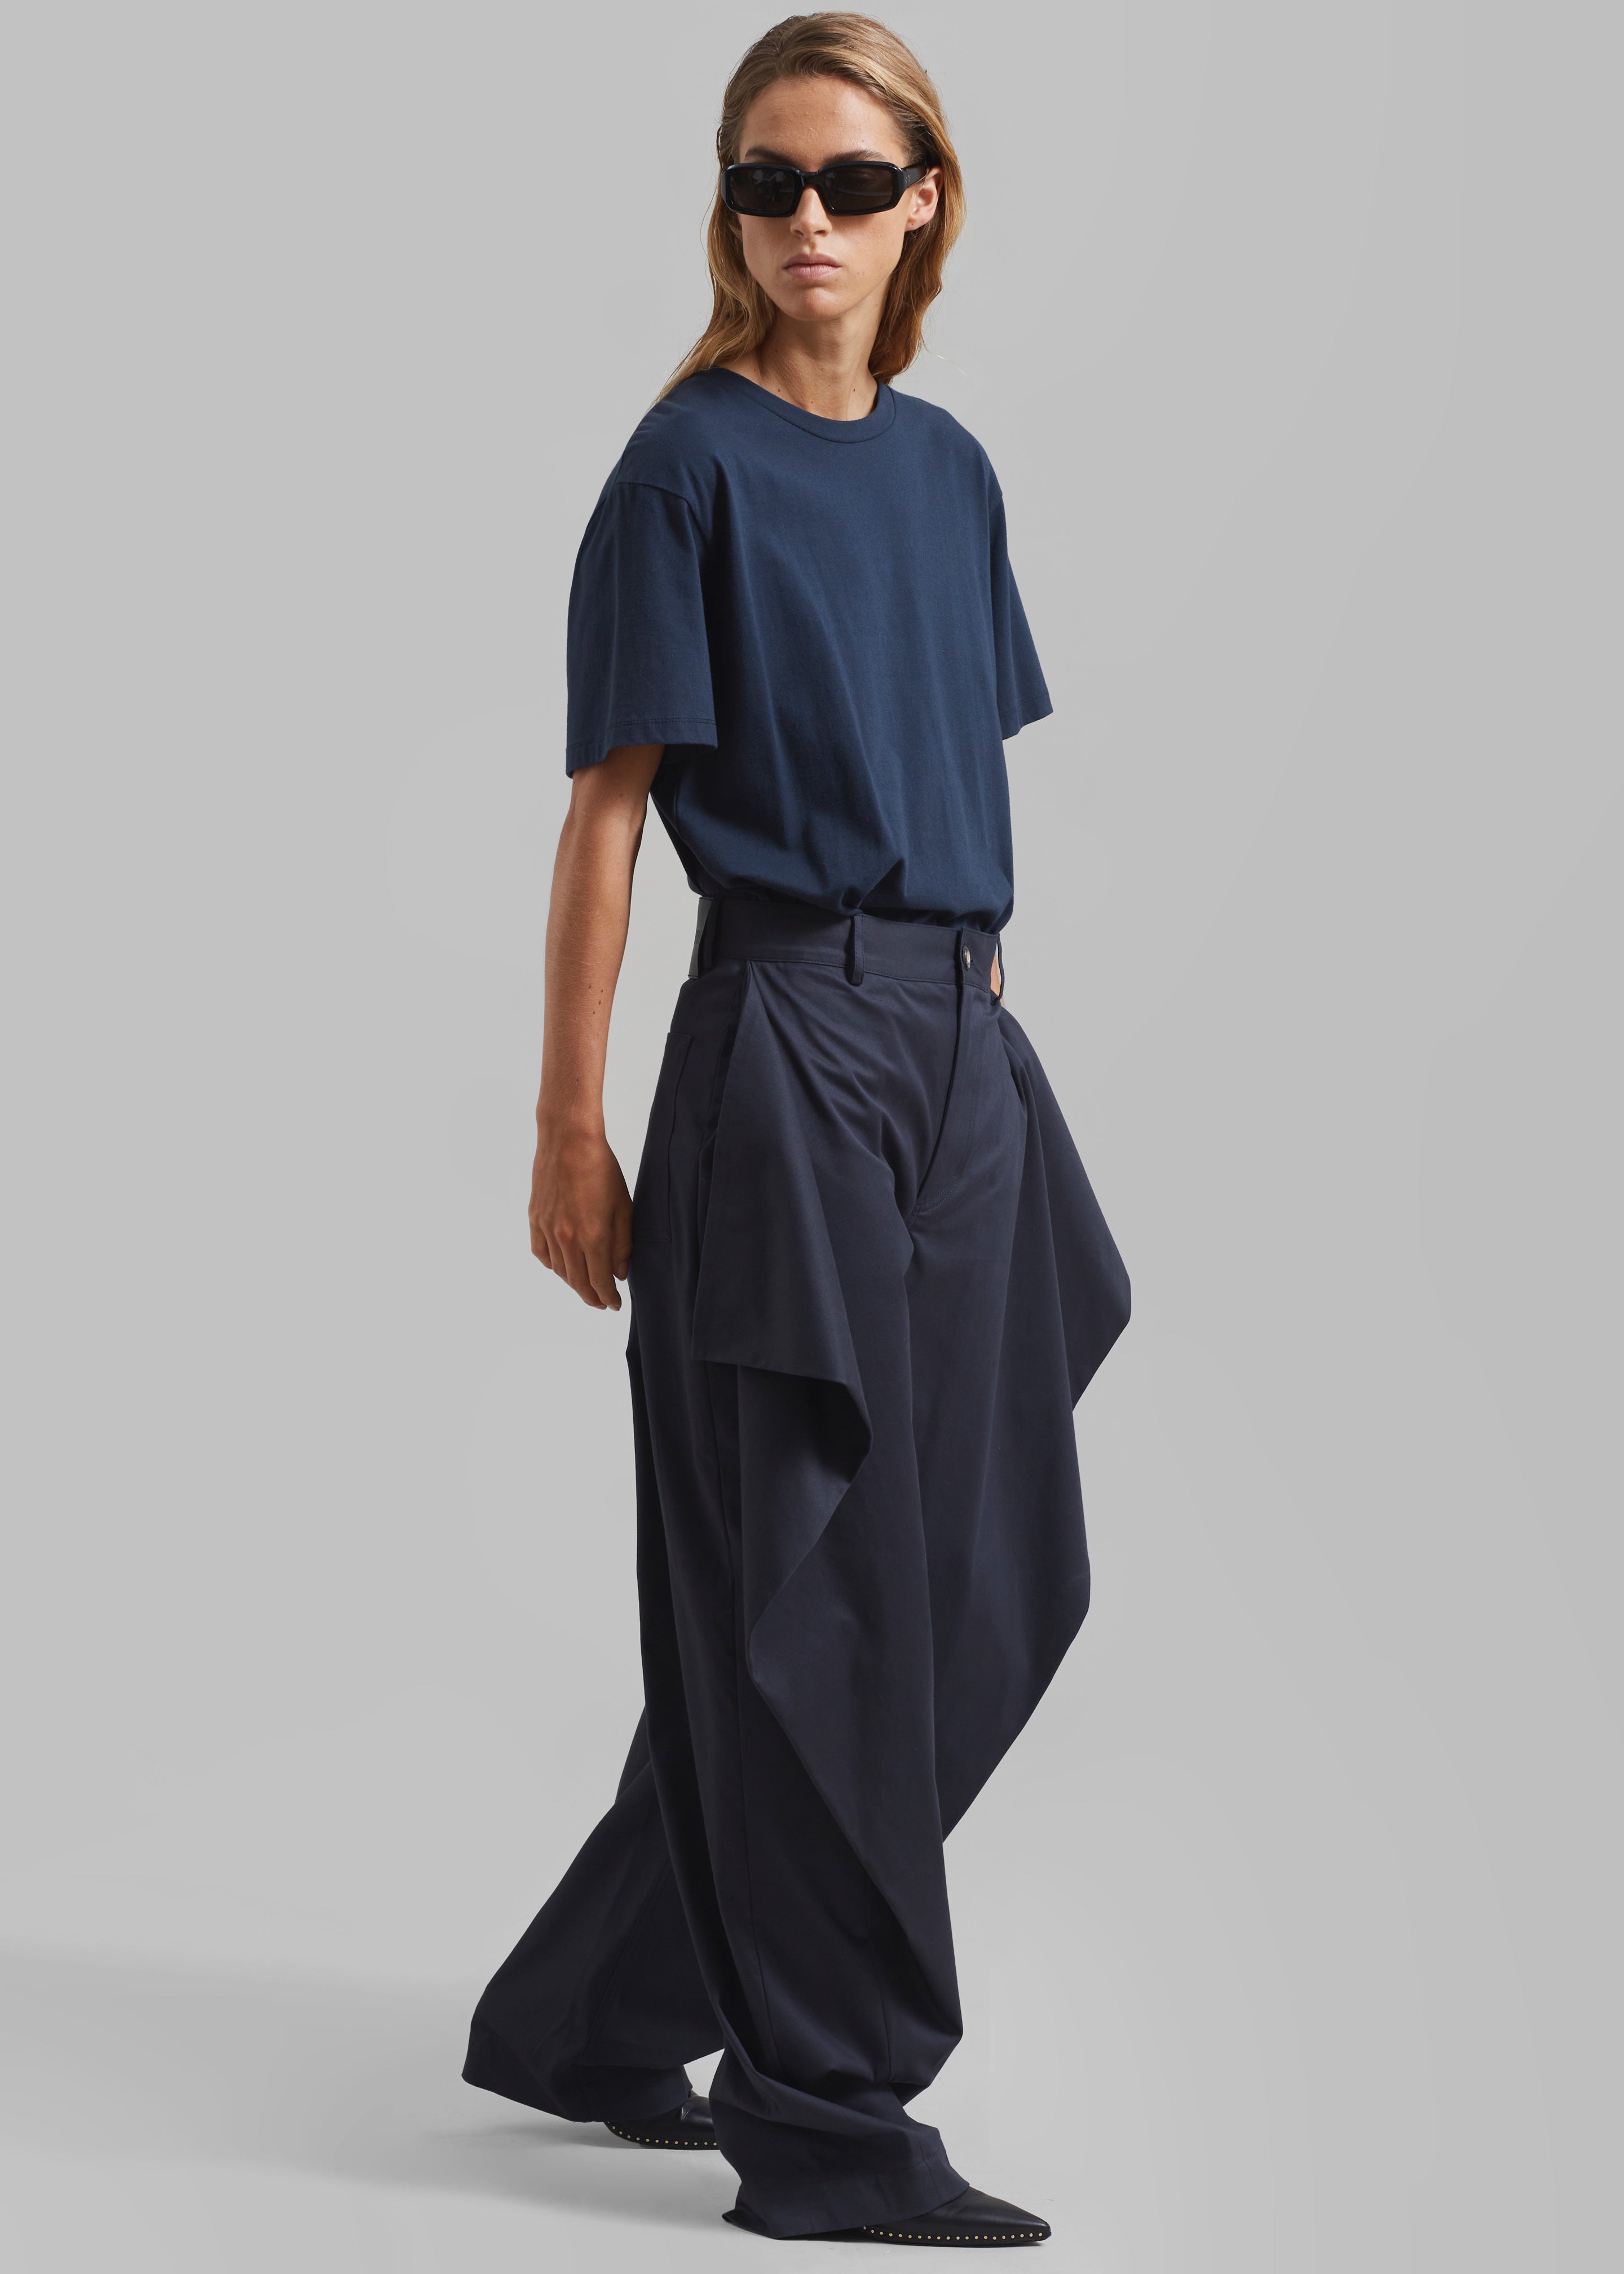 JW Anderson Kite Trousers - Navy - 8